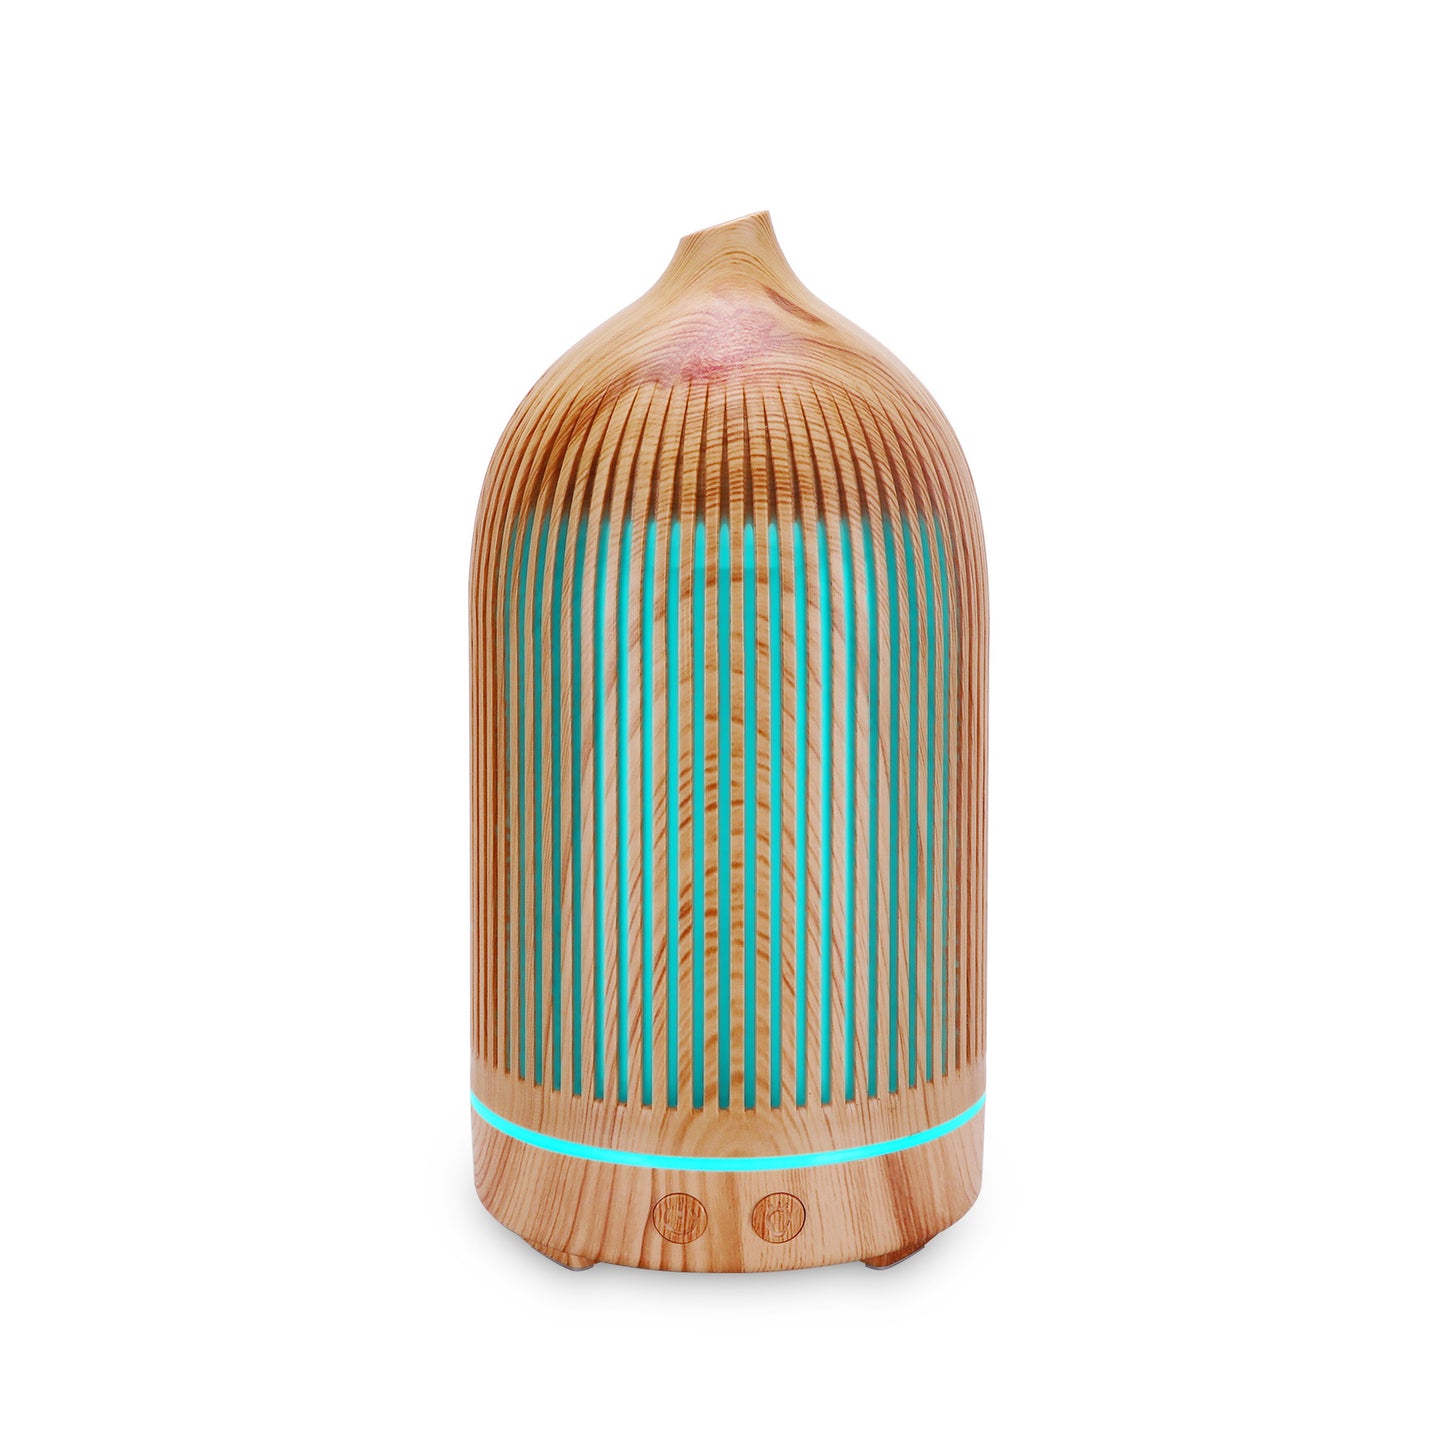 200ml hollow essential oil aromatherapy diffuser, 24V colorful vase humidifier USB fragrance machine